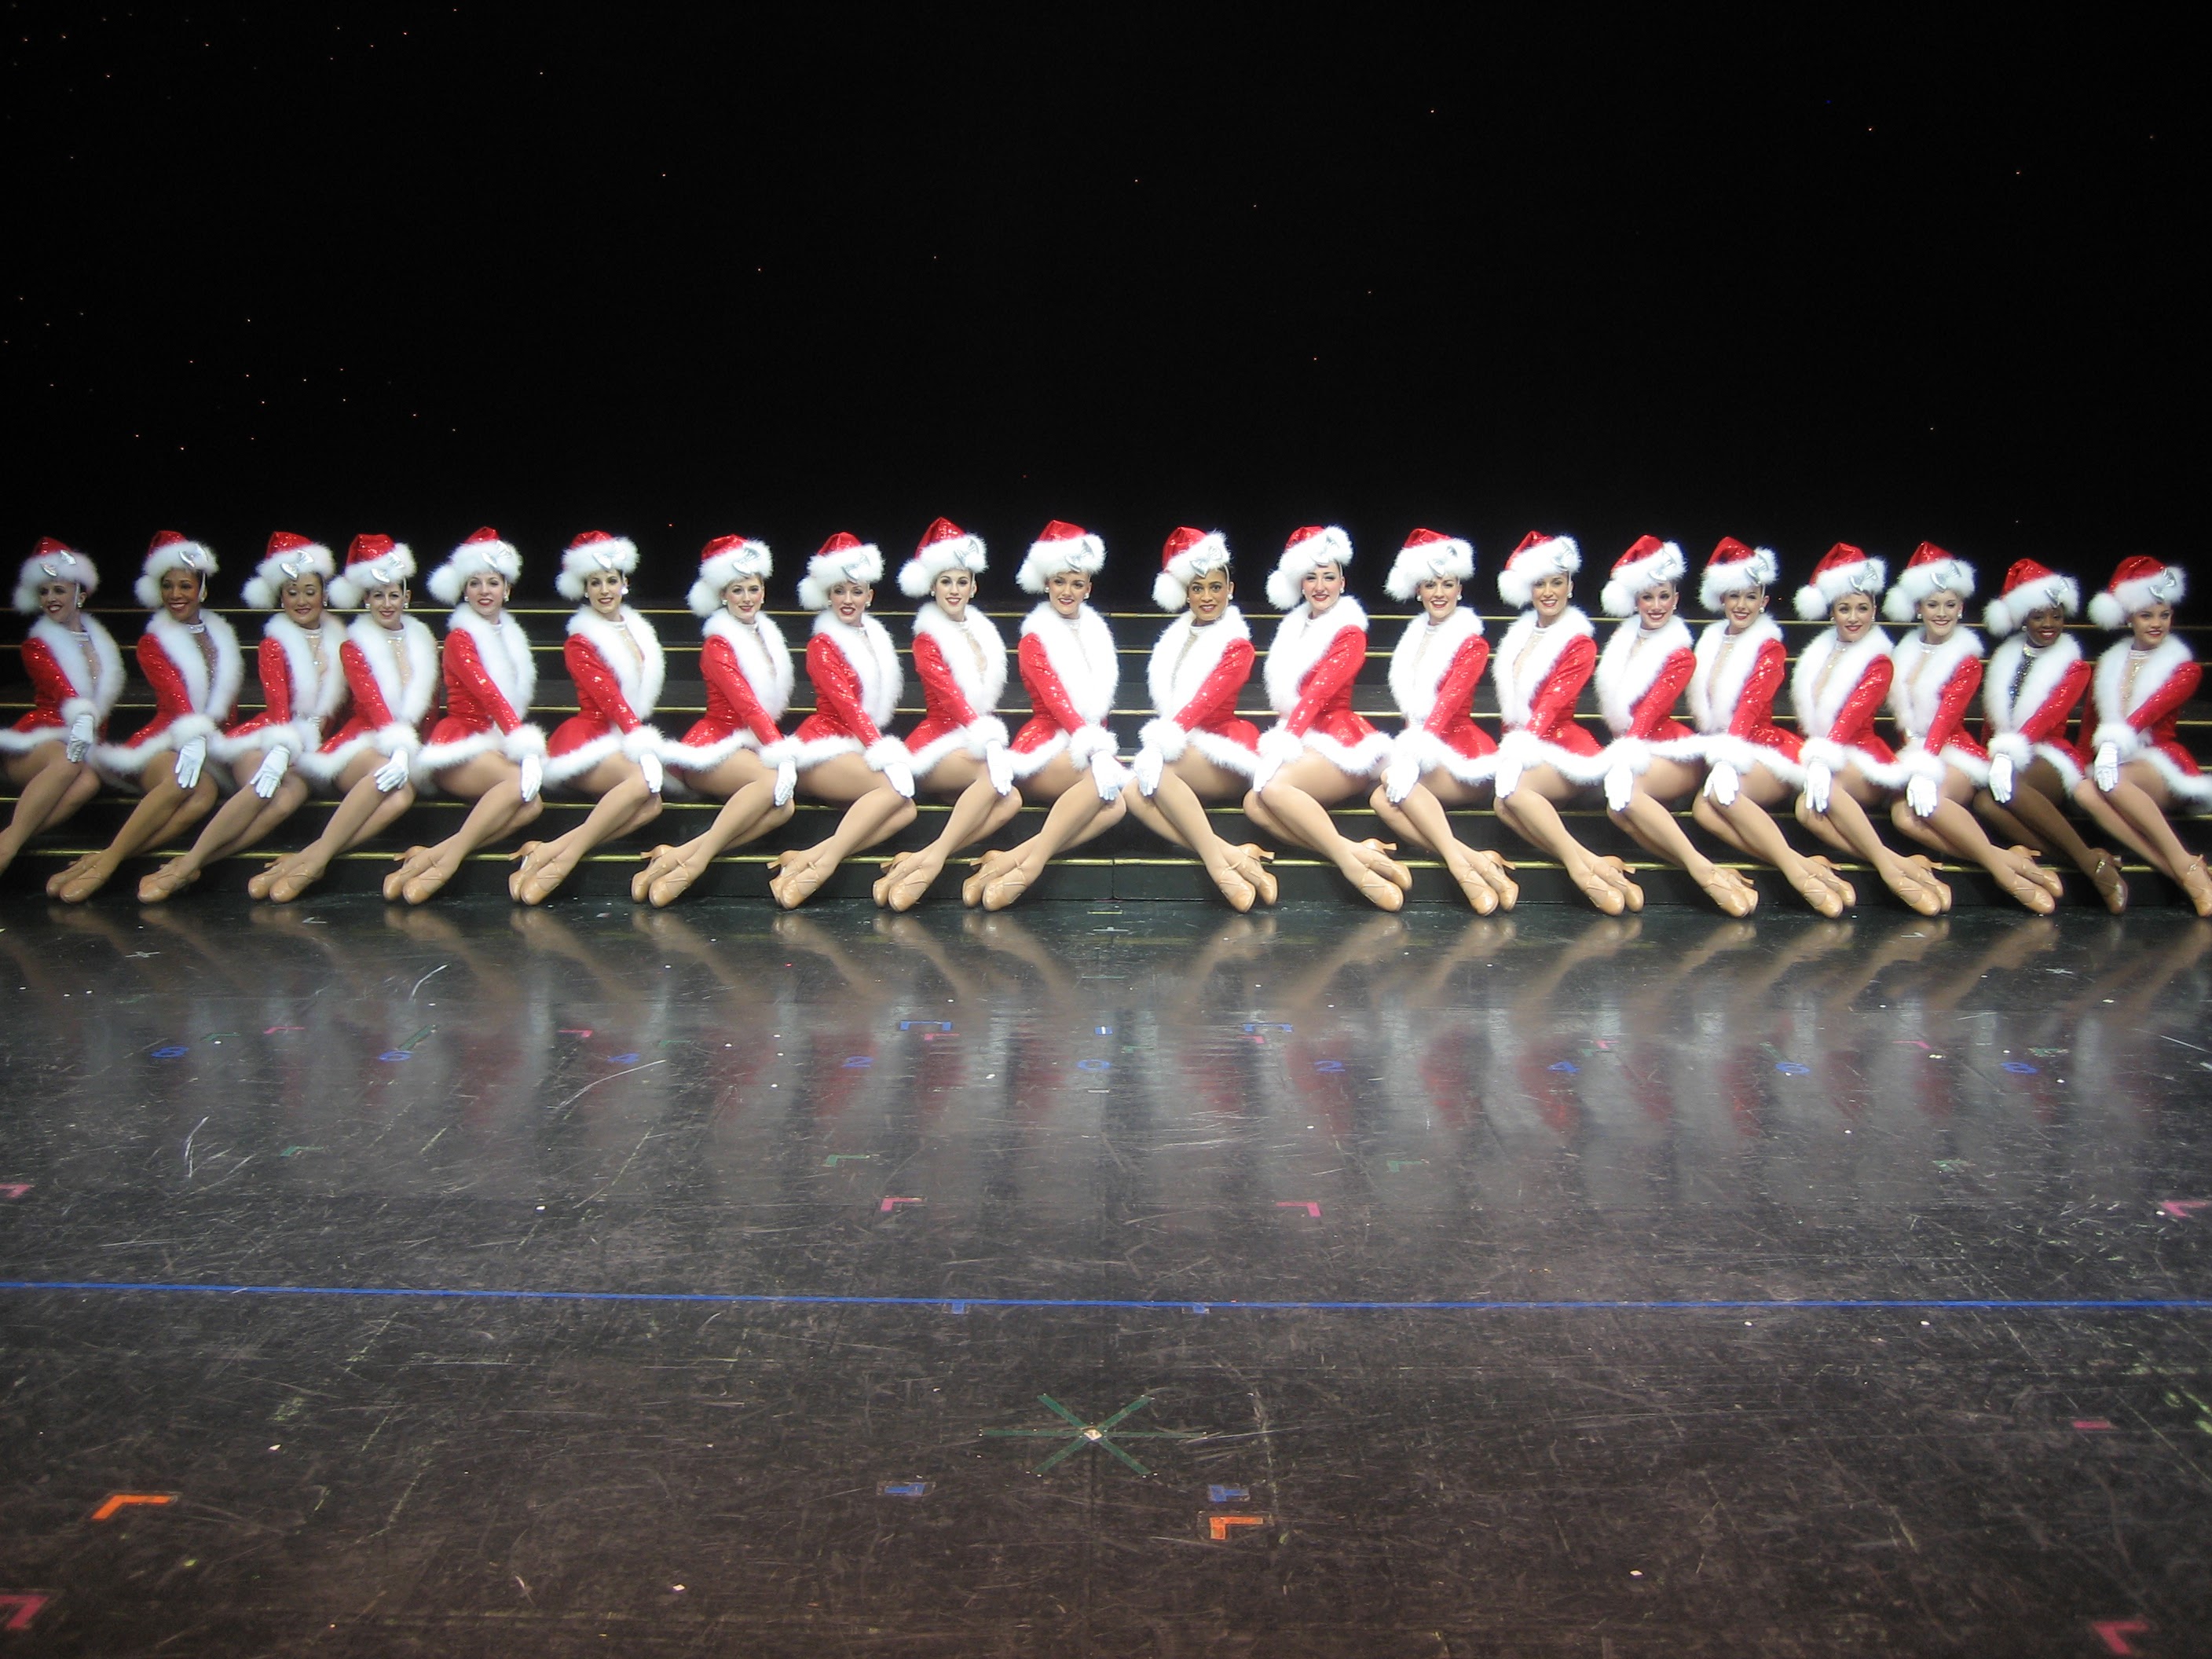 The Radio City Rockettes in 2009 (6th from the right)